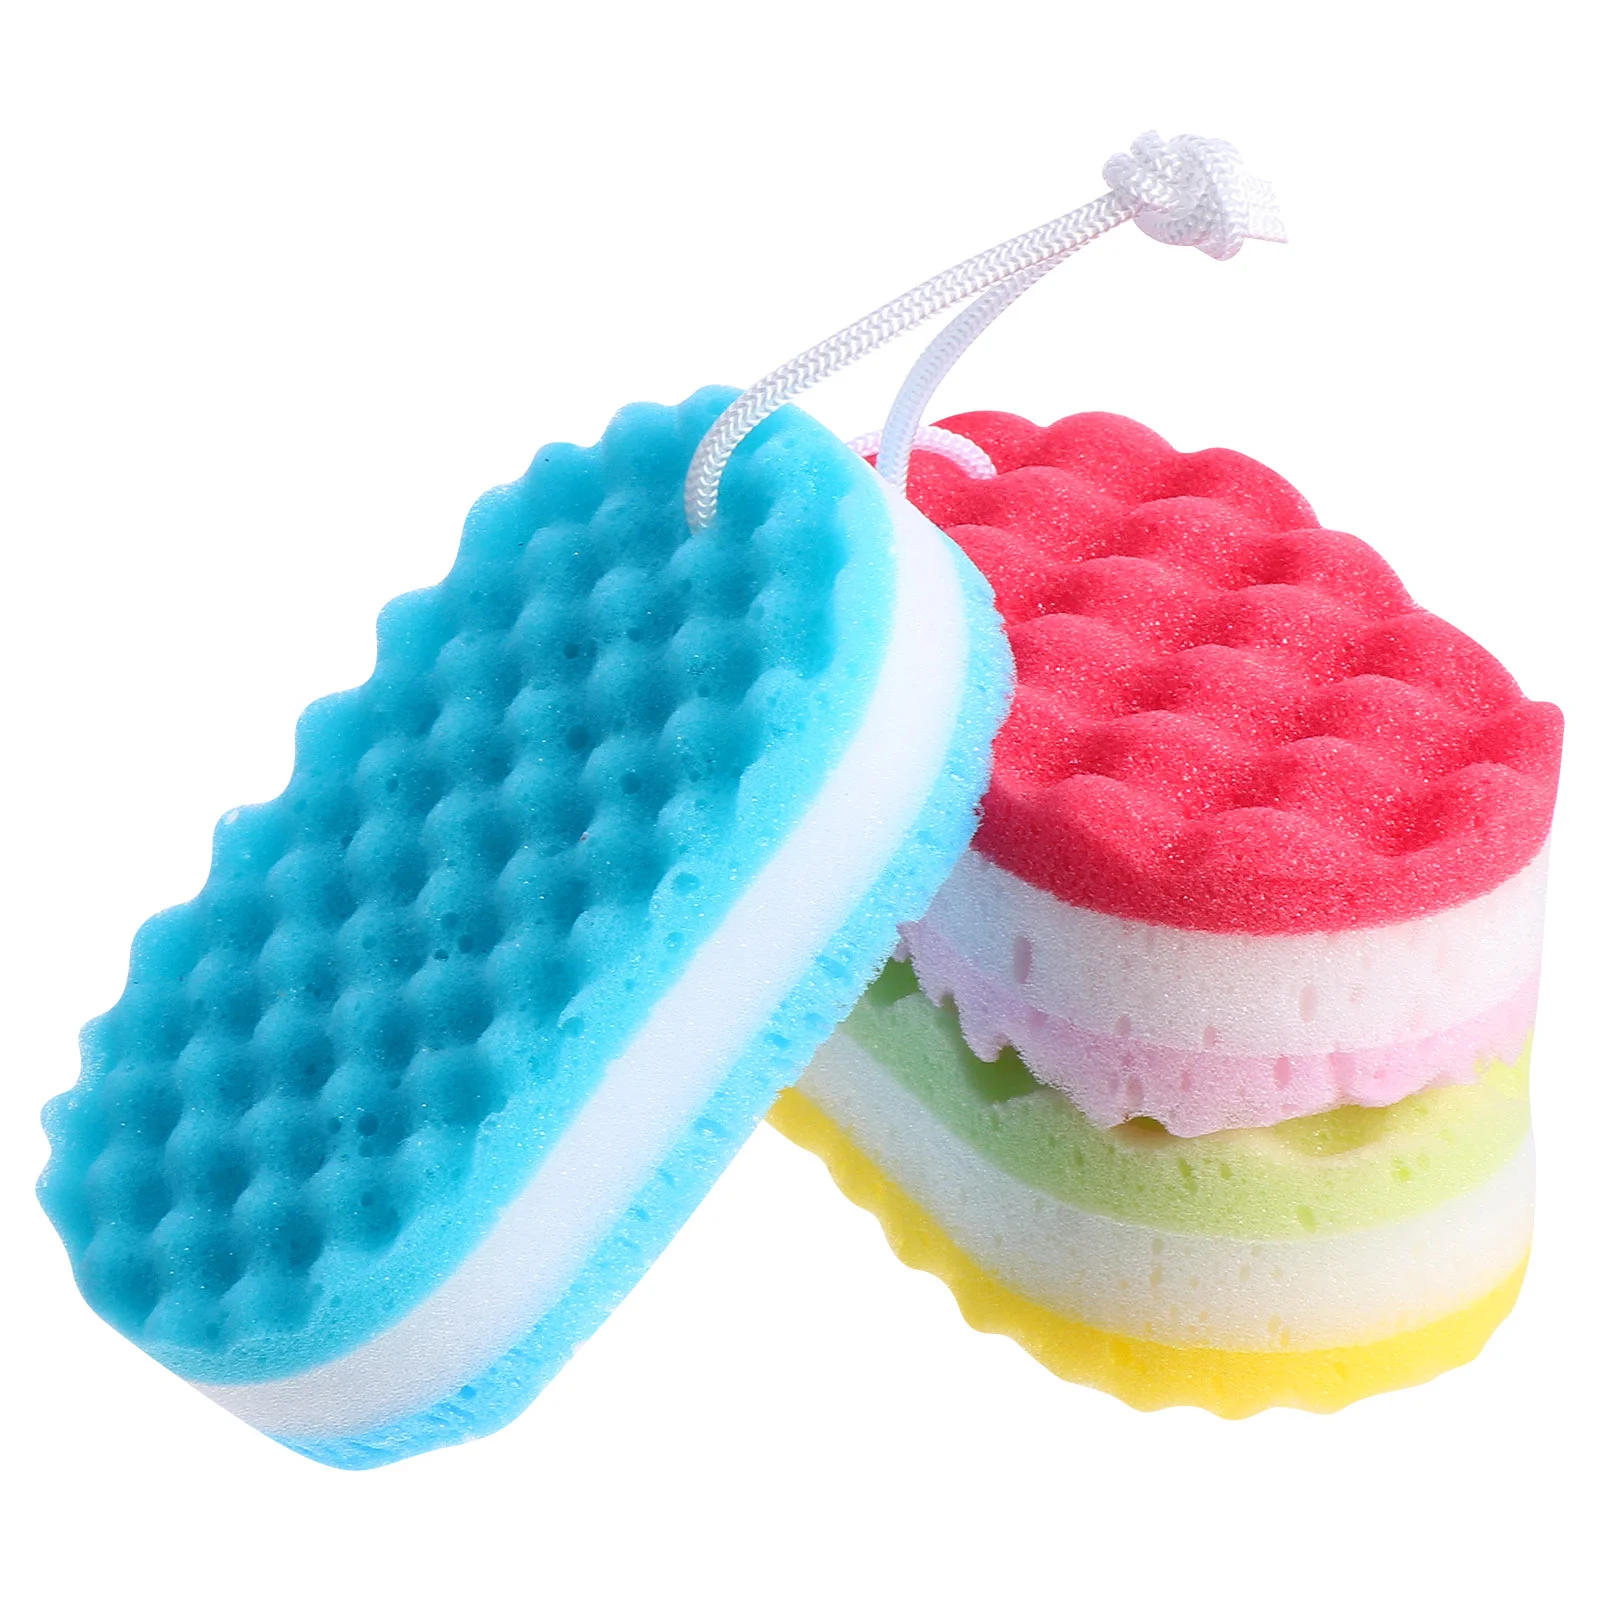 3 Pcs Three Layer Bath Sponge Cleaning Body Cleaner Take Shower Exfoliating Miss